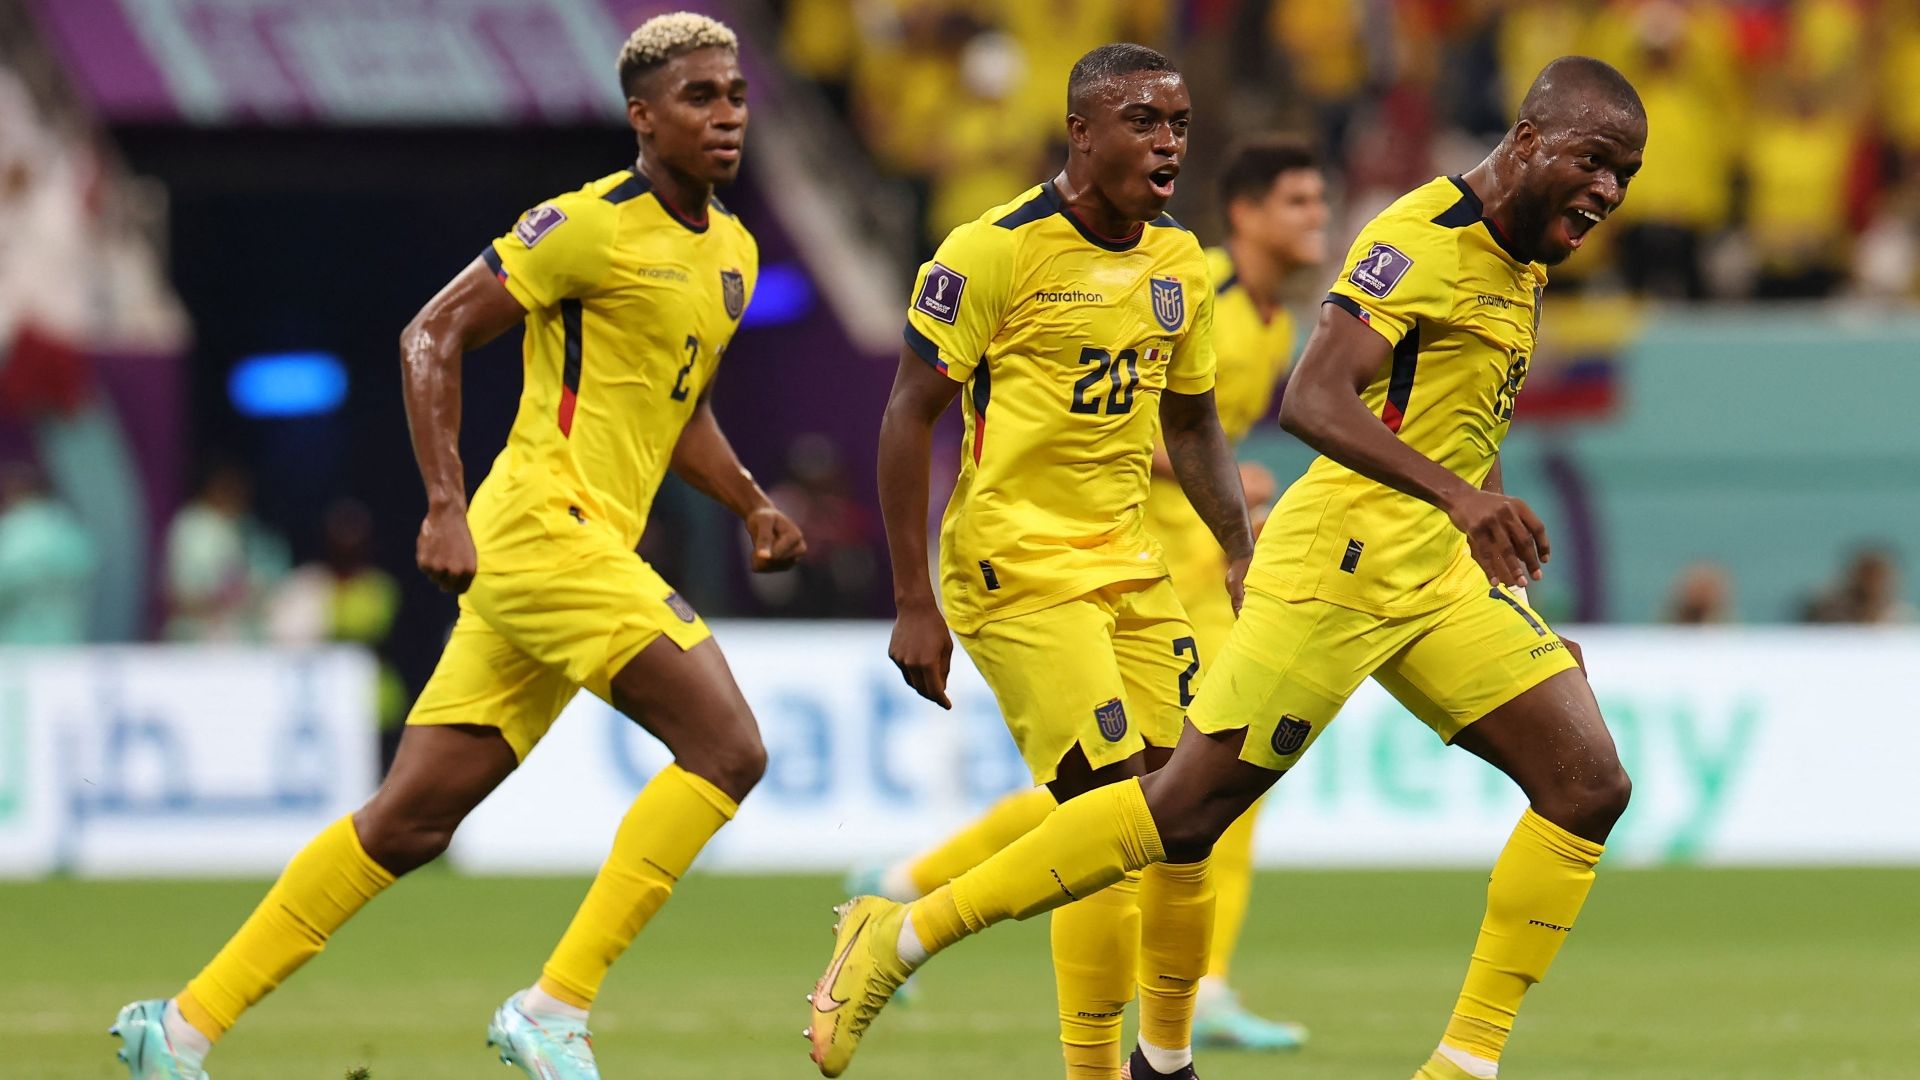 Valencia's double earns Ecuador a victory over Qatar in the opening match of 2022 FIFA World Cup